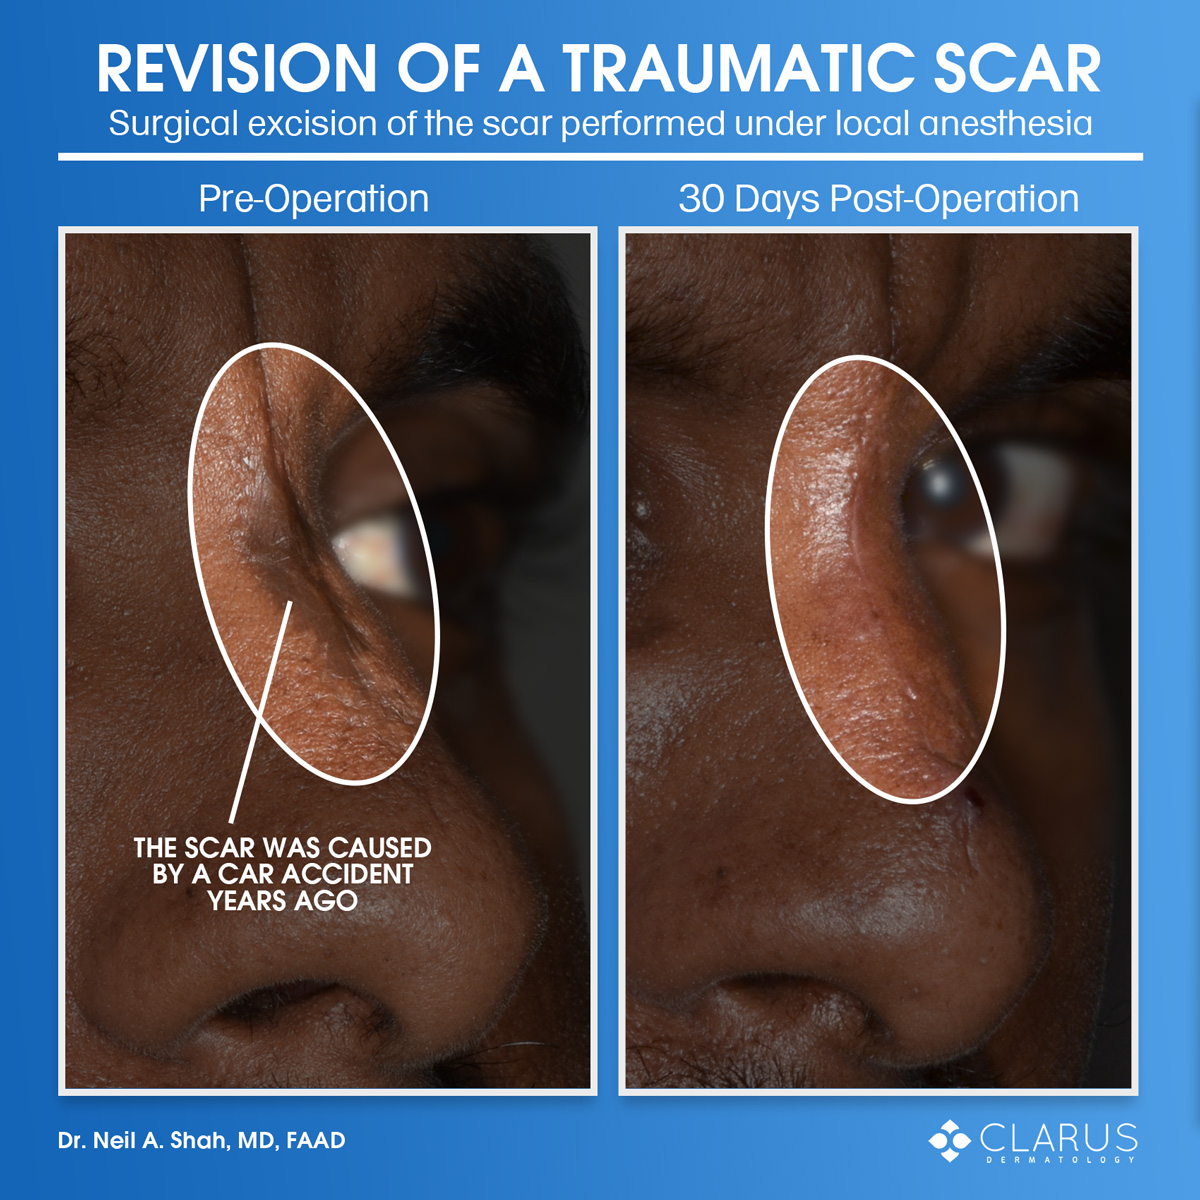 At Clarus Dermatology, we see quite a bit of scar revision referrals. The images below show the case of a patient with a traumatic scar caused by a car accident years ago. Dr. Shah performed a surgical excision of the scar under local anesthesia to provide the patient with a better aesthetic outcome.